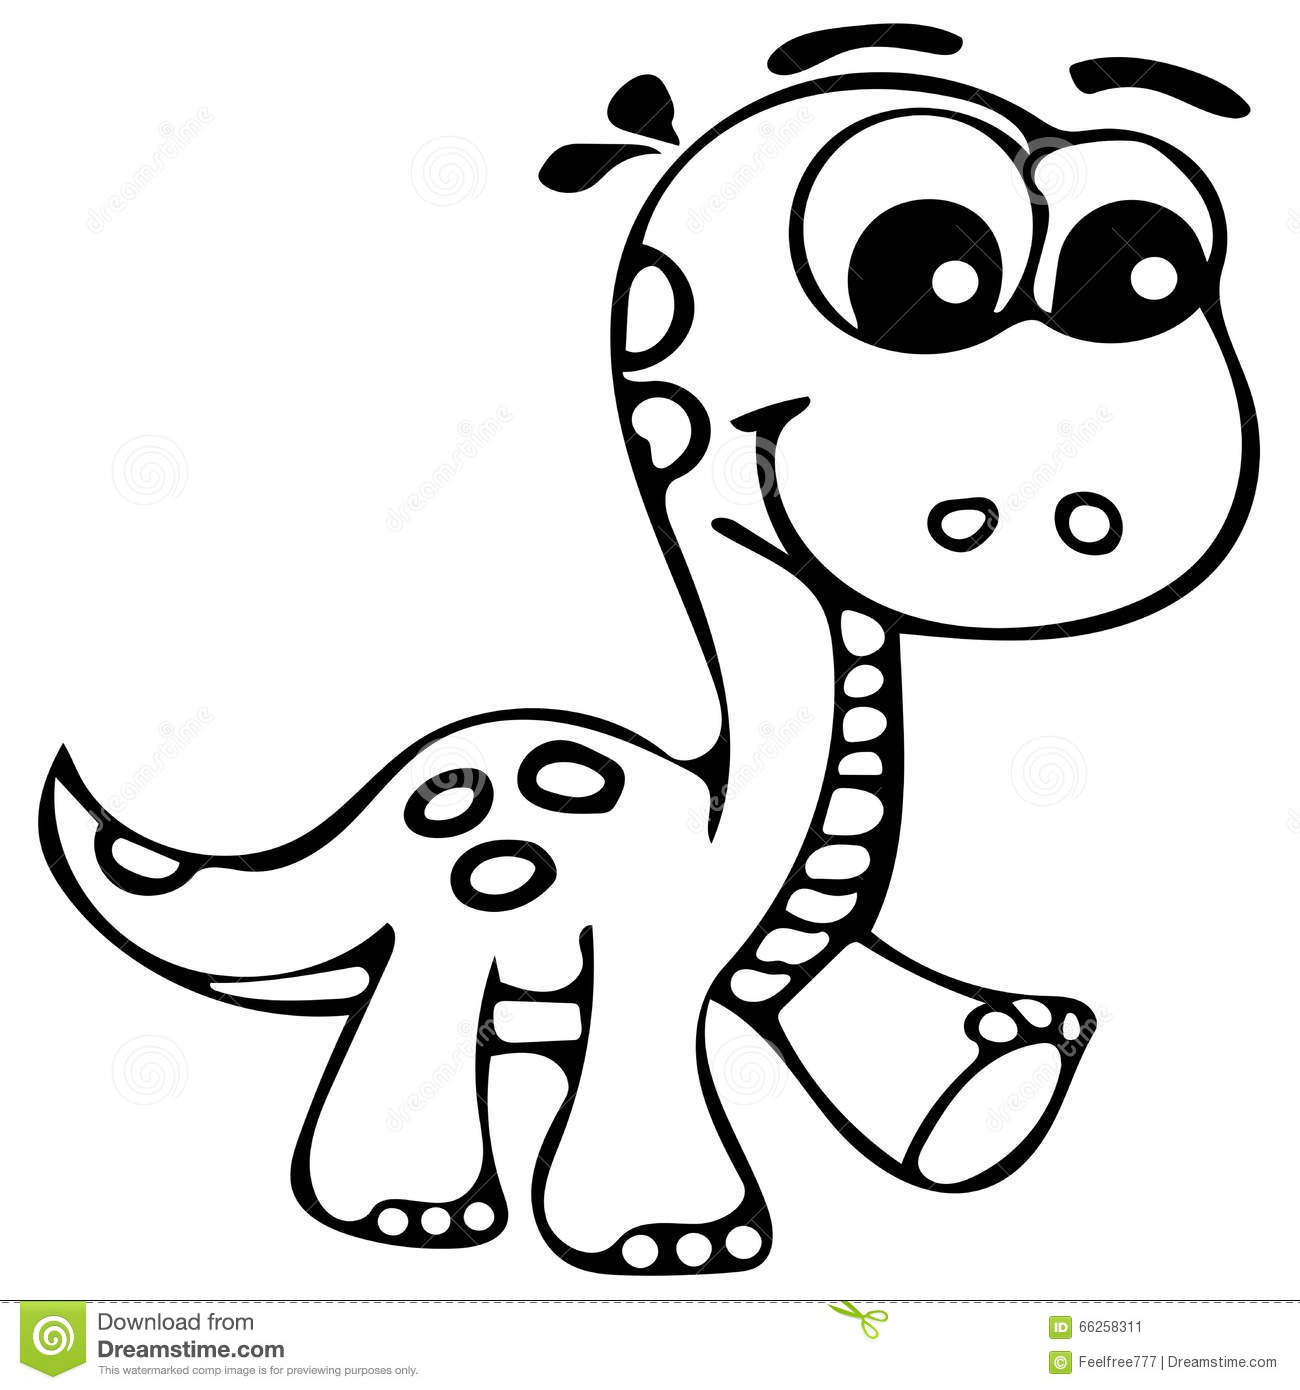 Cute Baby Dinosaur Coloring Pages at GetDrawings | Free download